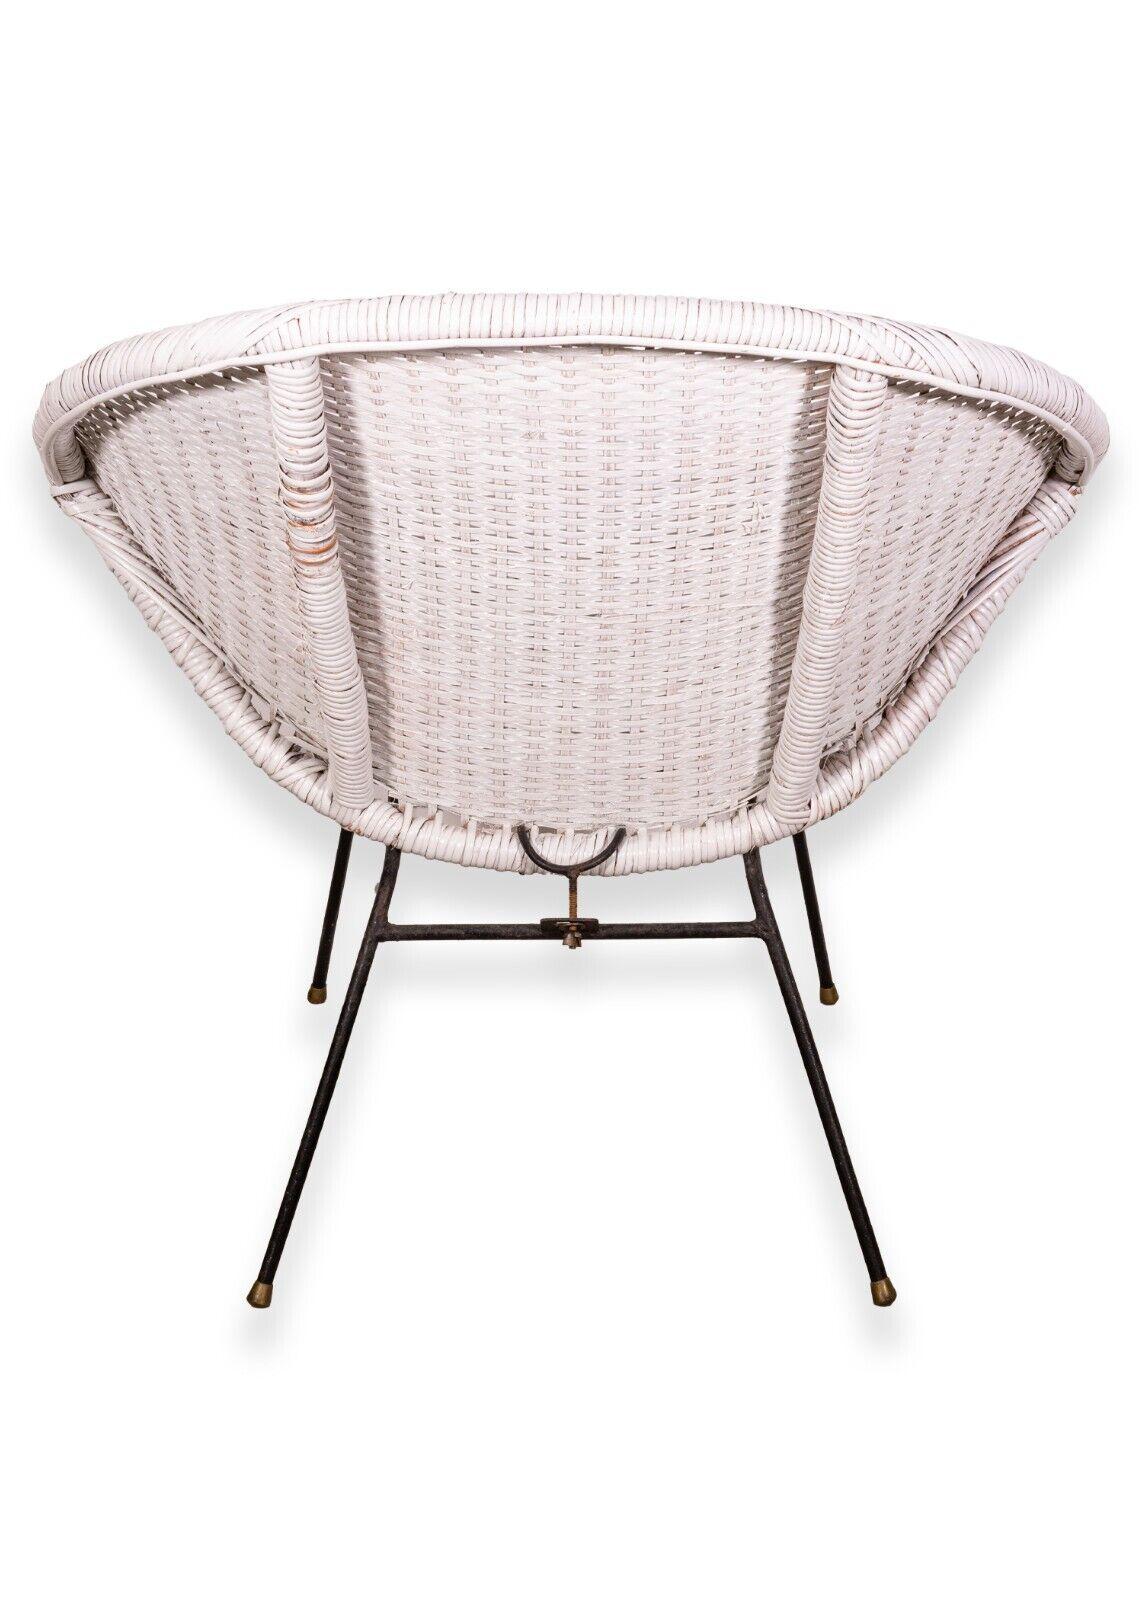 20th Century Mid-Century Modern Pair of White Scoop Rattan Chairs For Sale